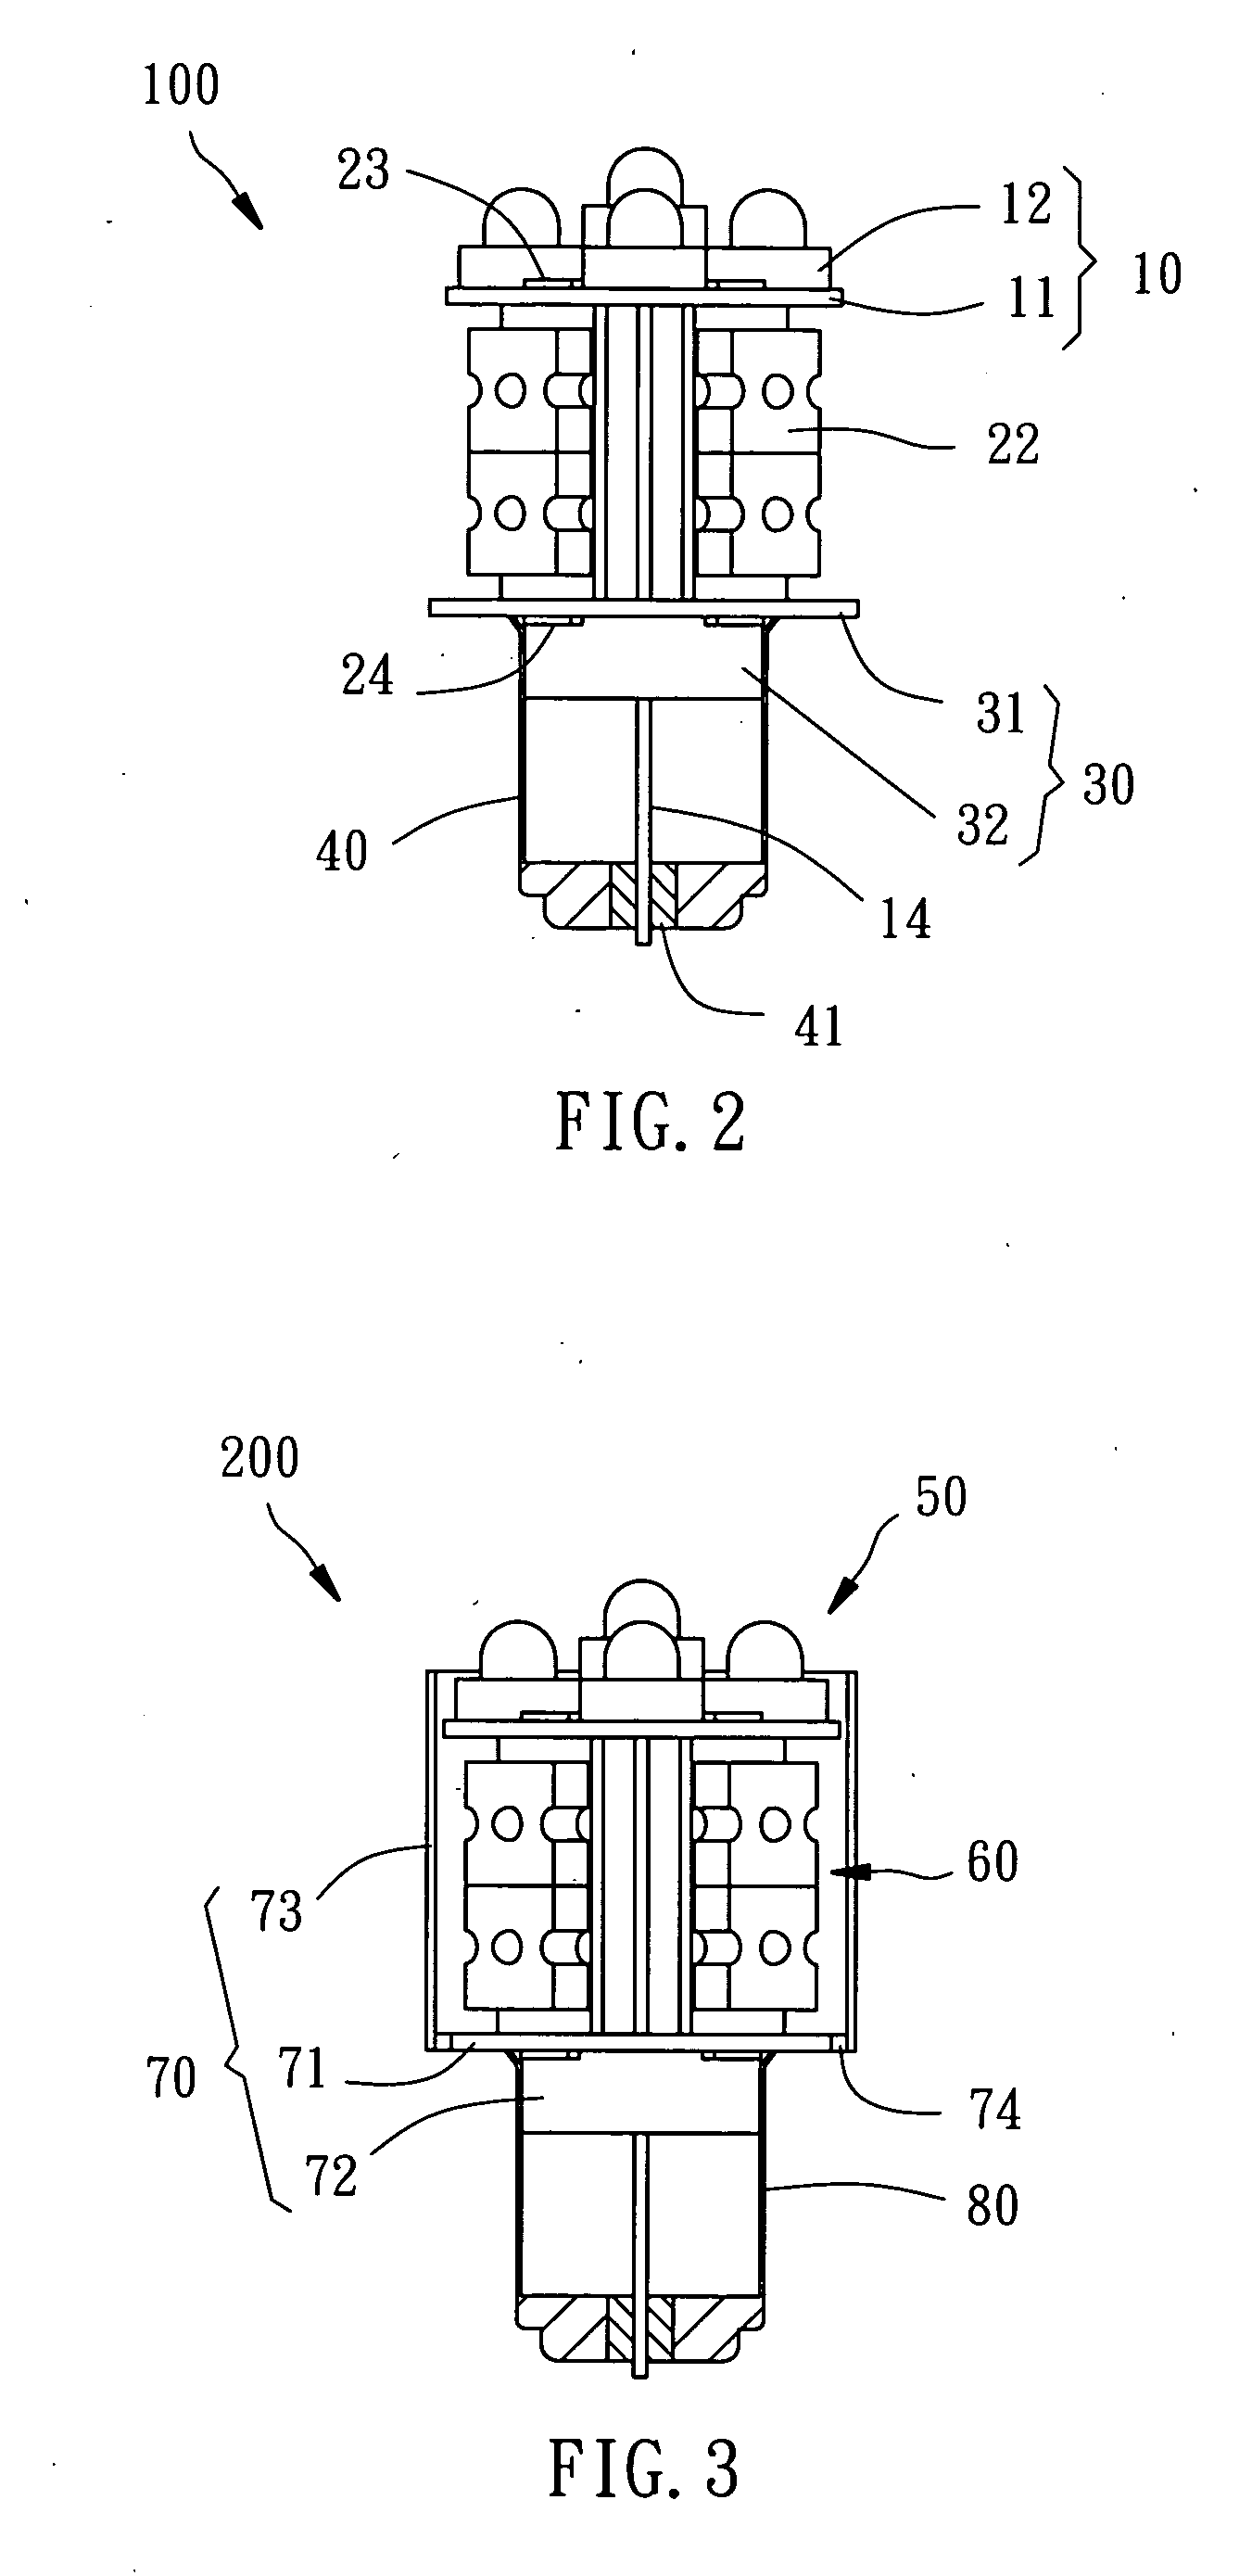 Bulb with light emitting diodes